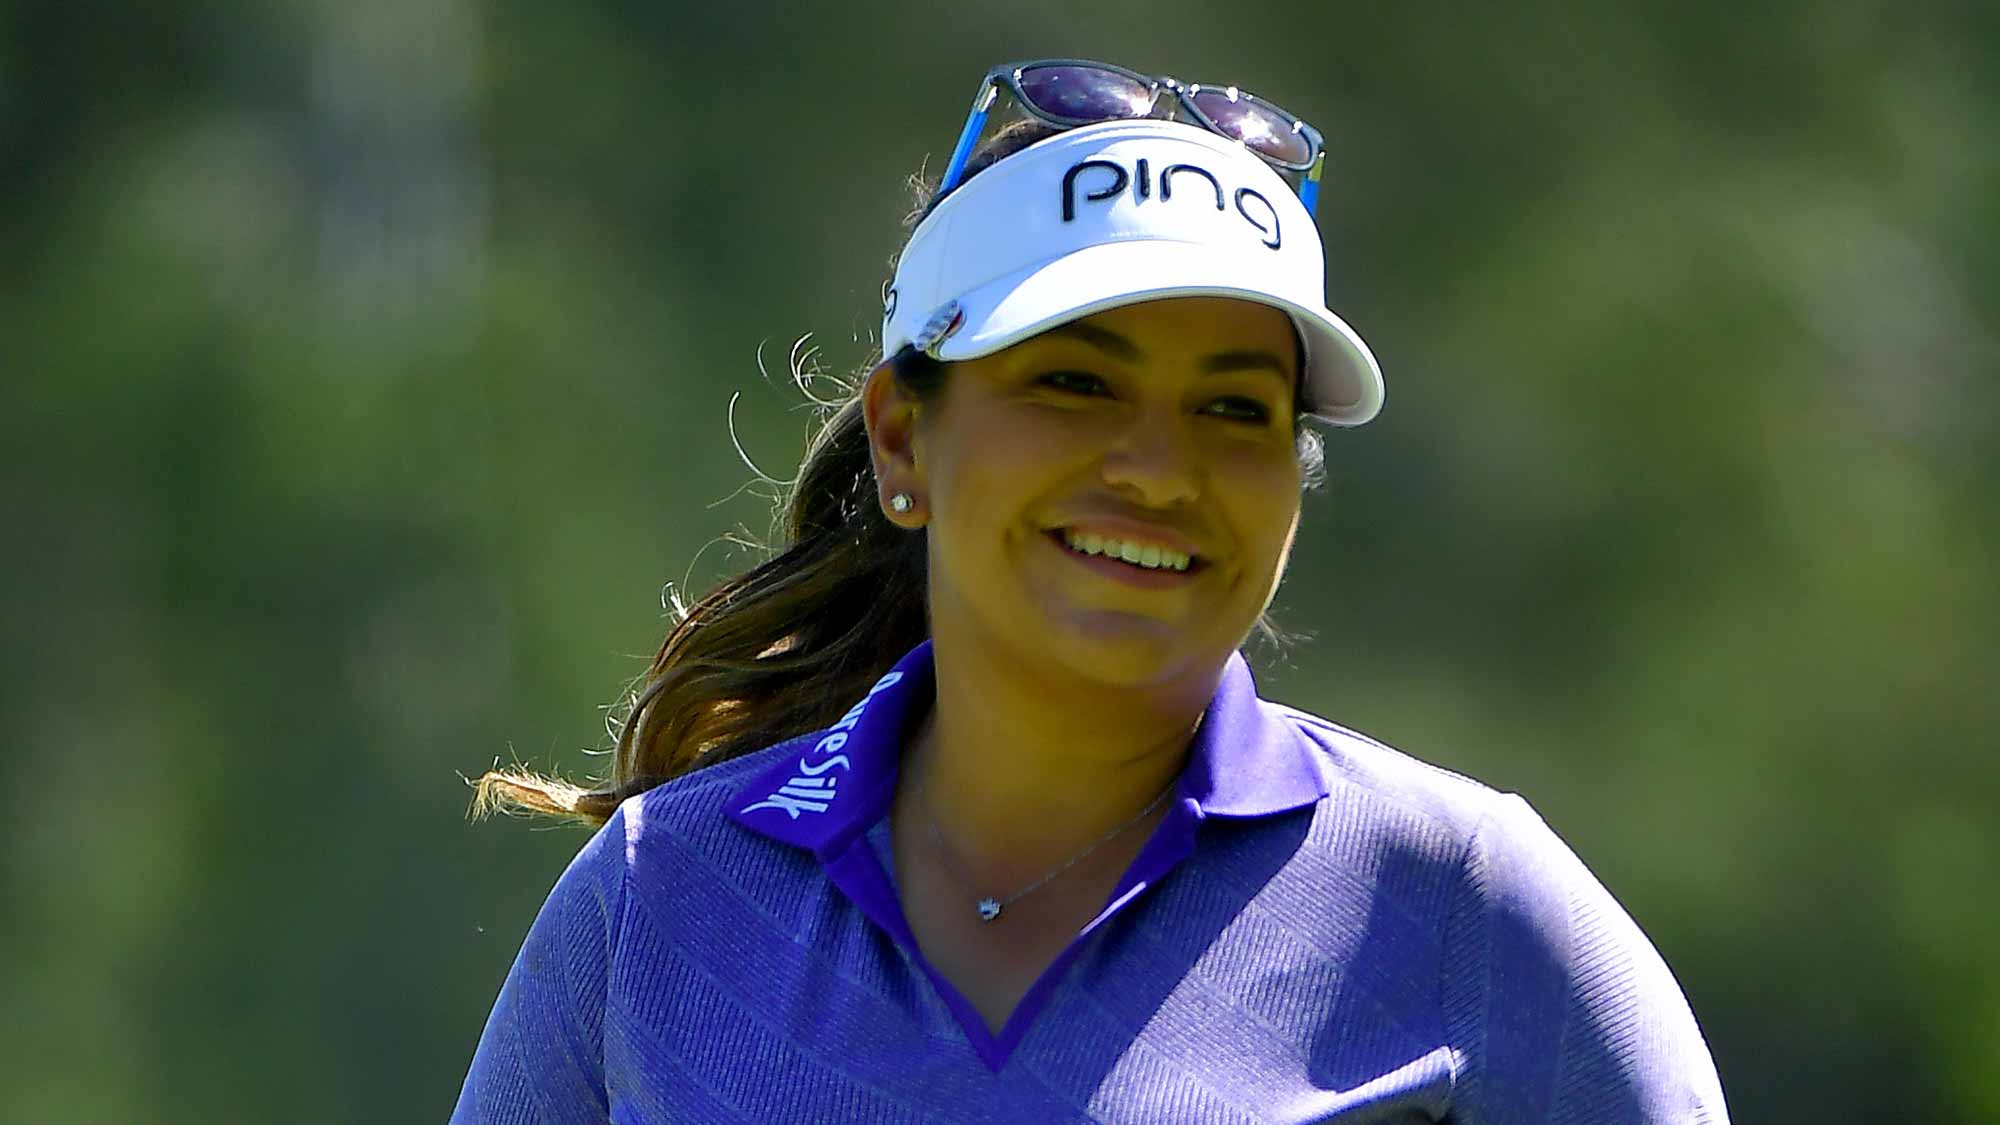 Lizette Salas reacts to her missed birdie putt on the 4th green during the Final Round of the LPGA KIA CLASSIC at the Park Hyatt Aviara golf course on March 25, 2018 in Carlsbad, California